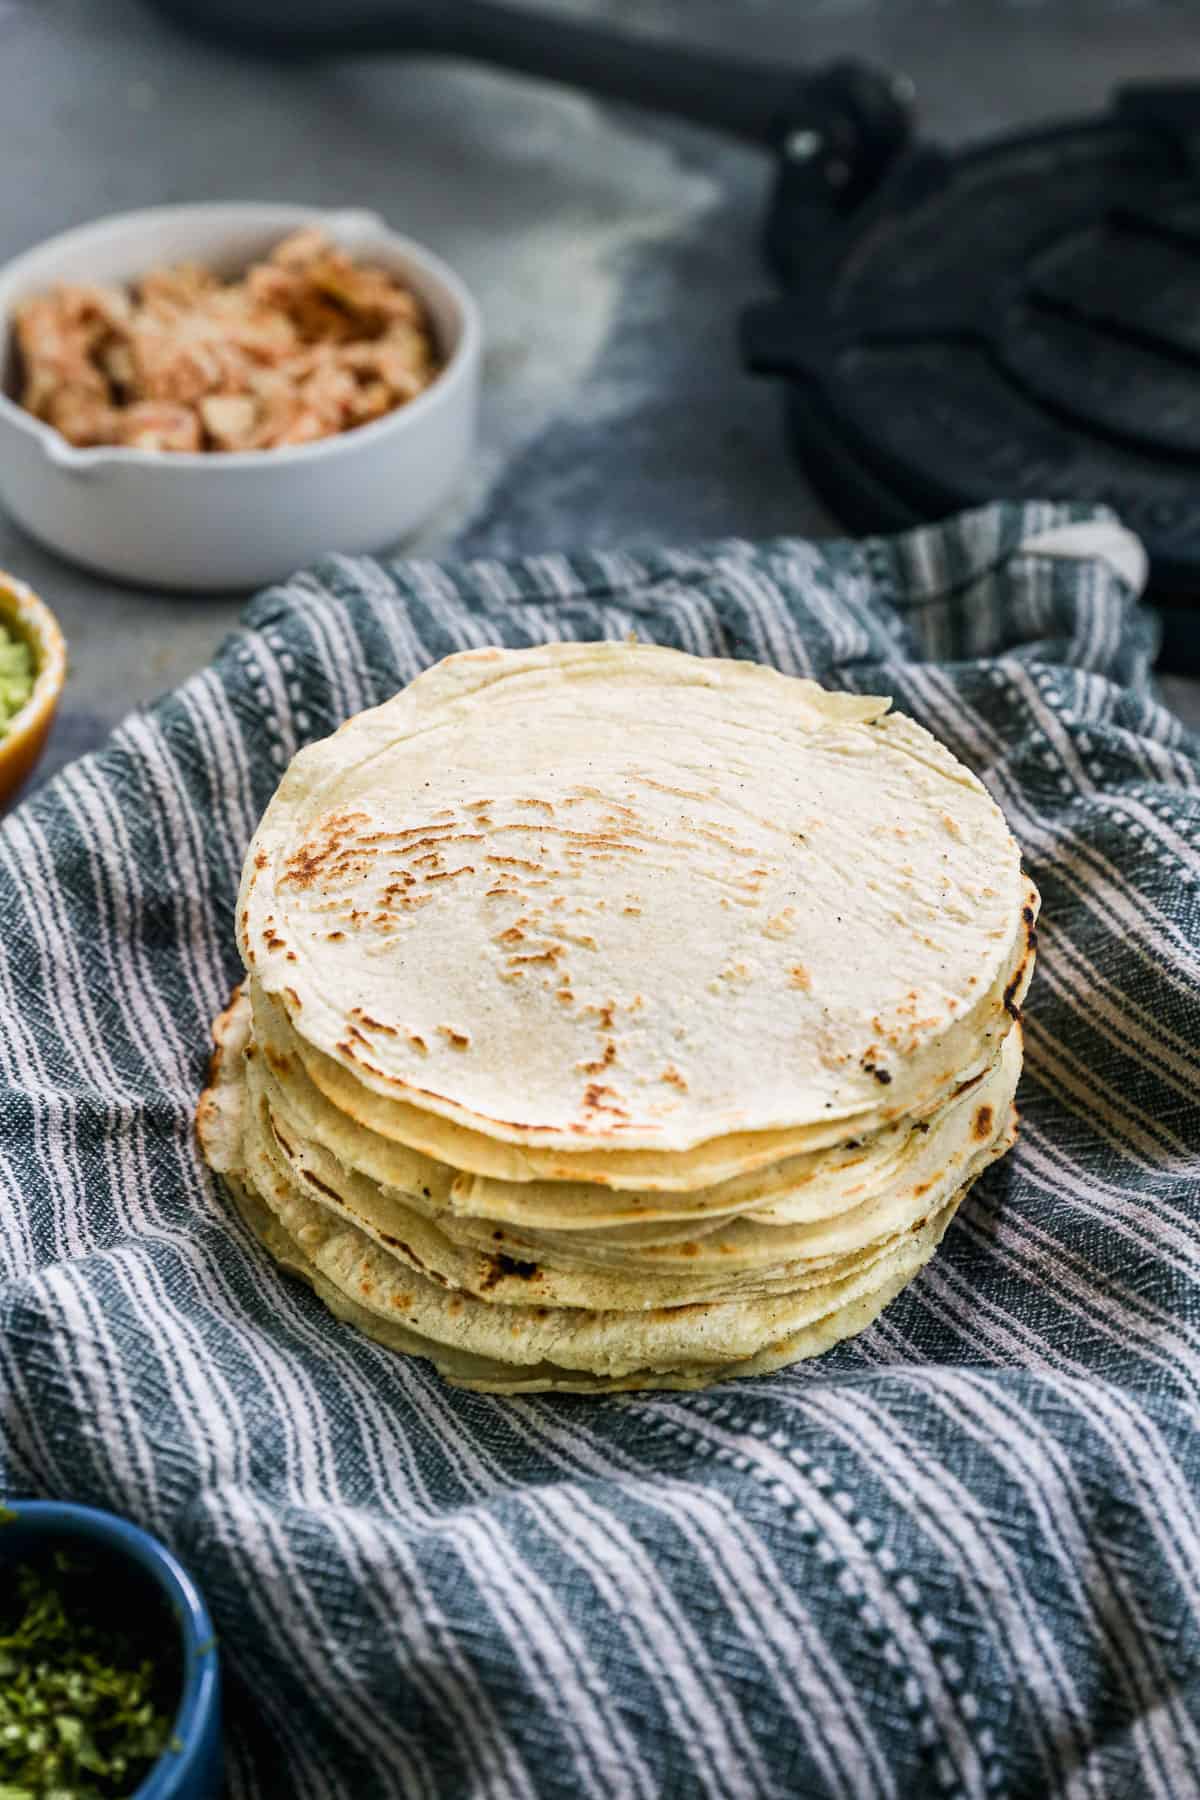 A stack of homemade Corn Tortillas, ready to use in tacos or enchiladas.